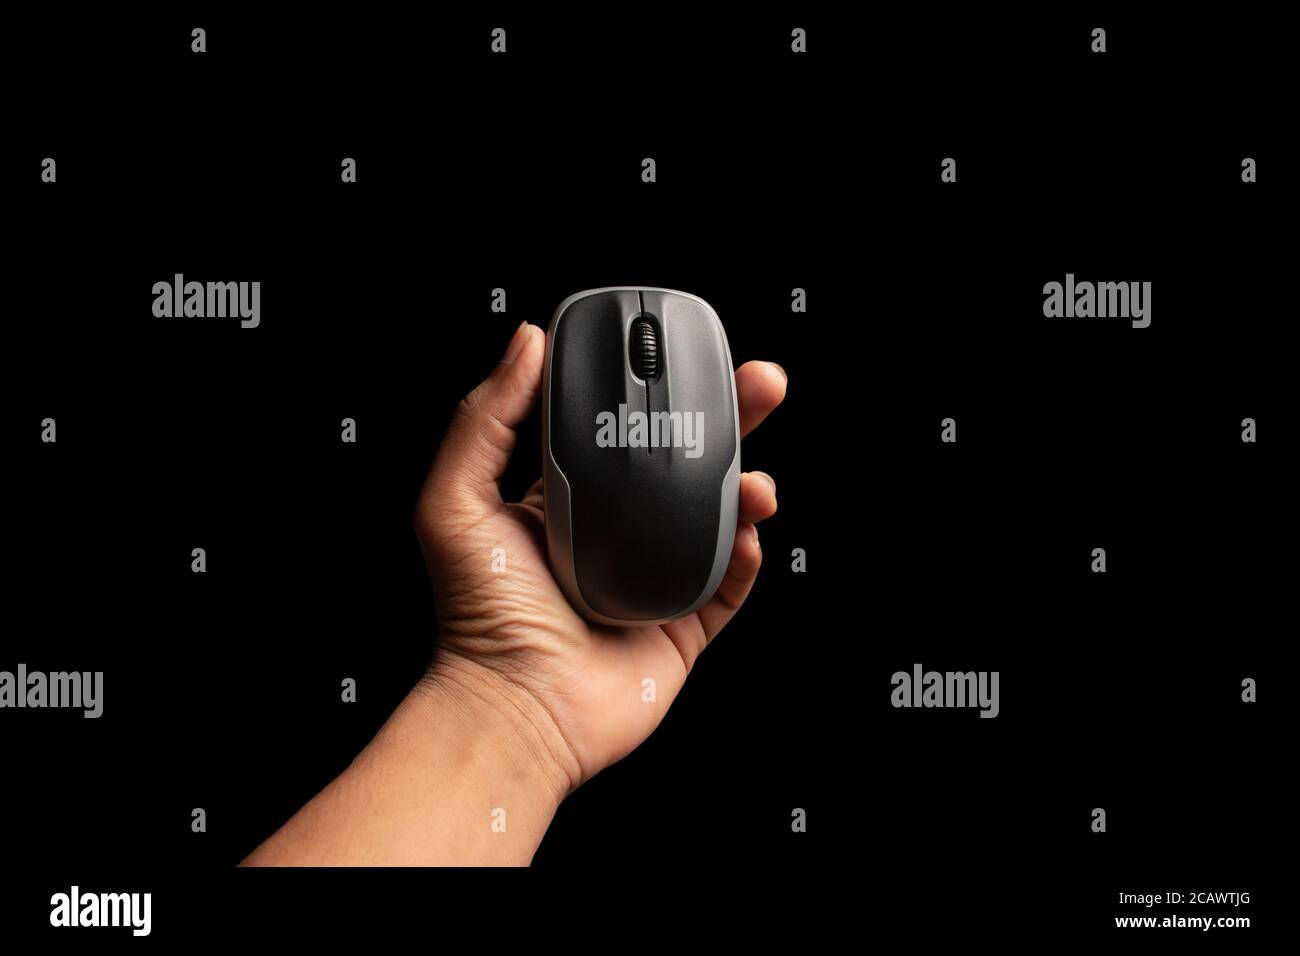 hand holding computer mouse isolated on the black background. Stock Photo